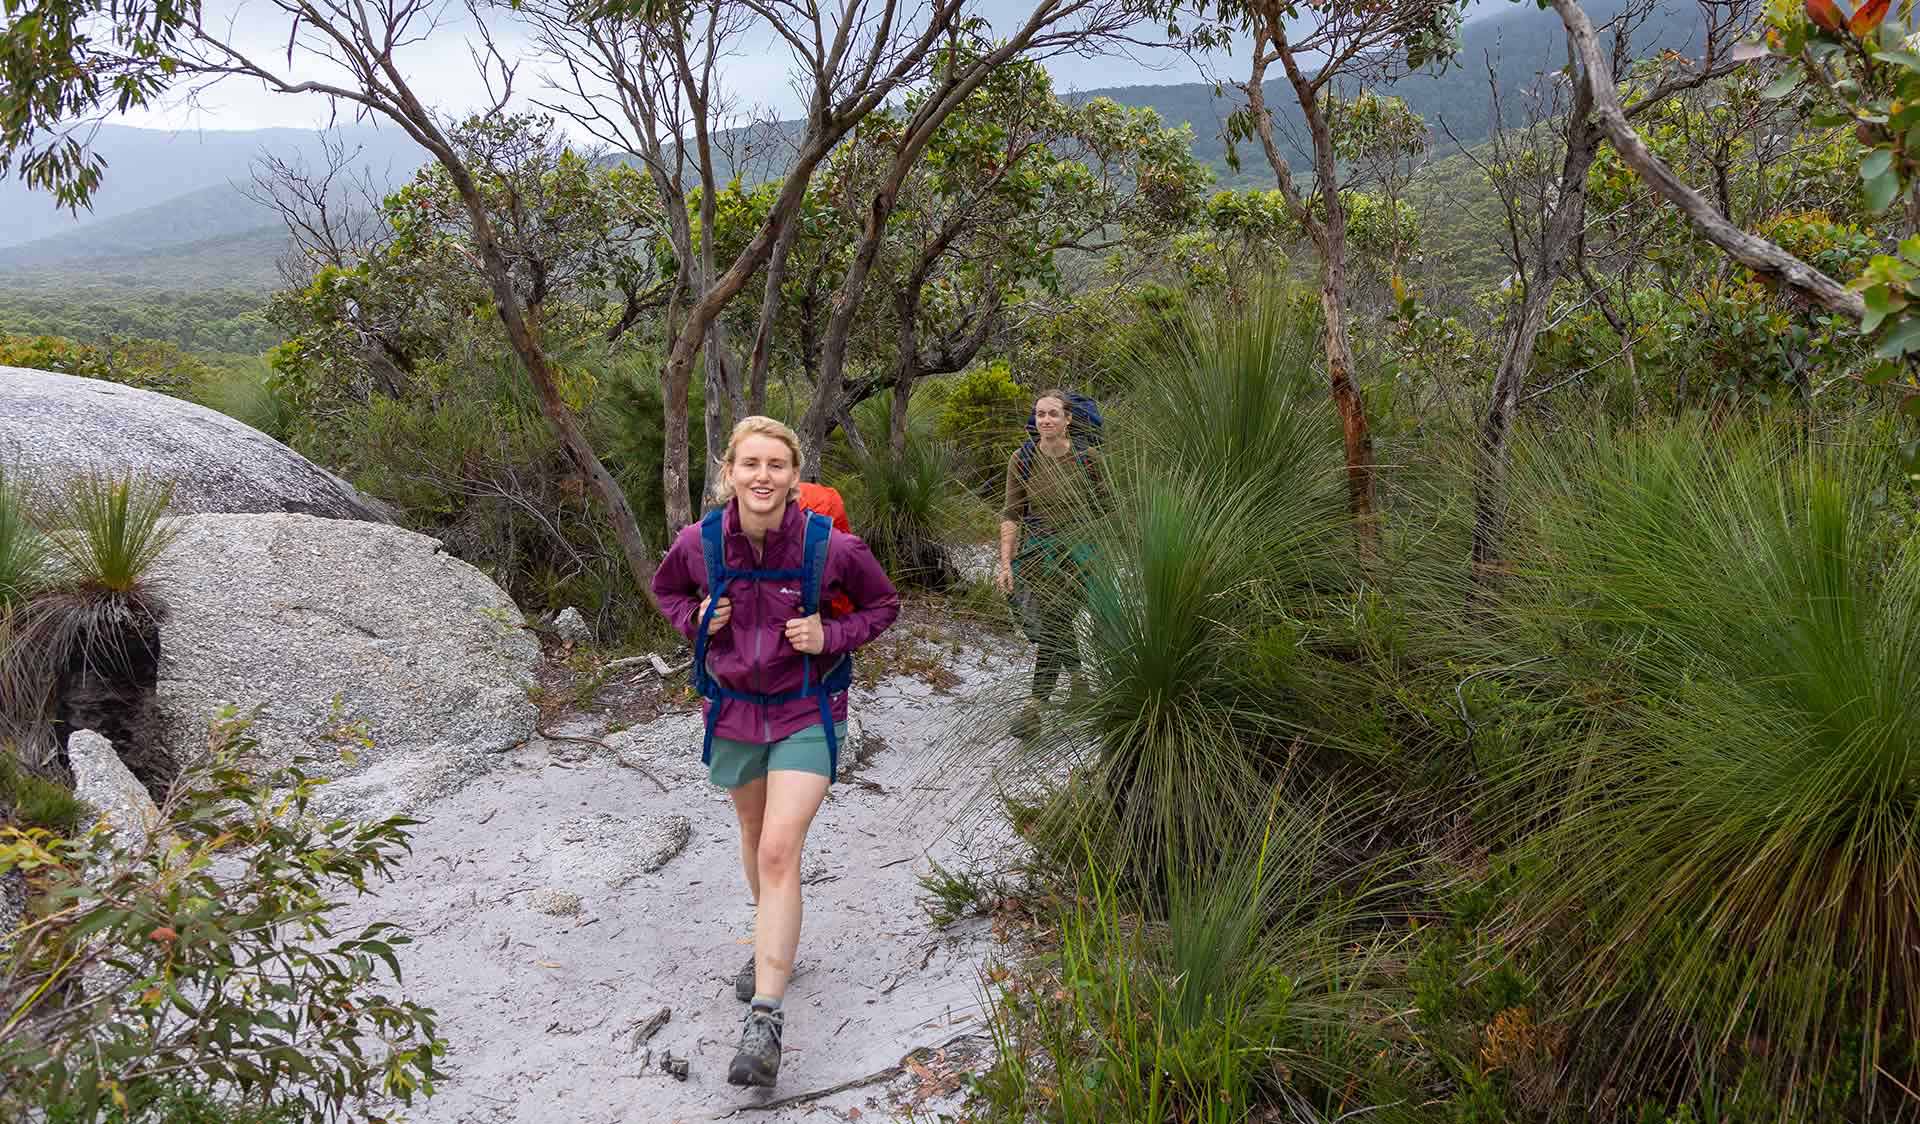 Two women walk along the track between granite rocks and grass trees on the Southern Circuit hiking trail at Wilsons Promontory National Park